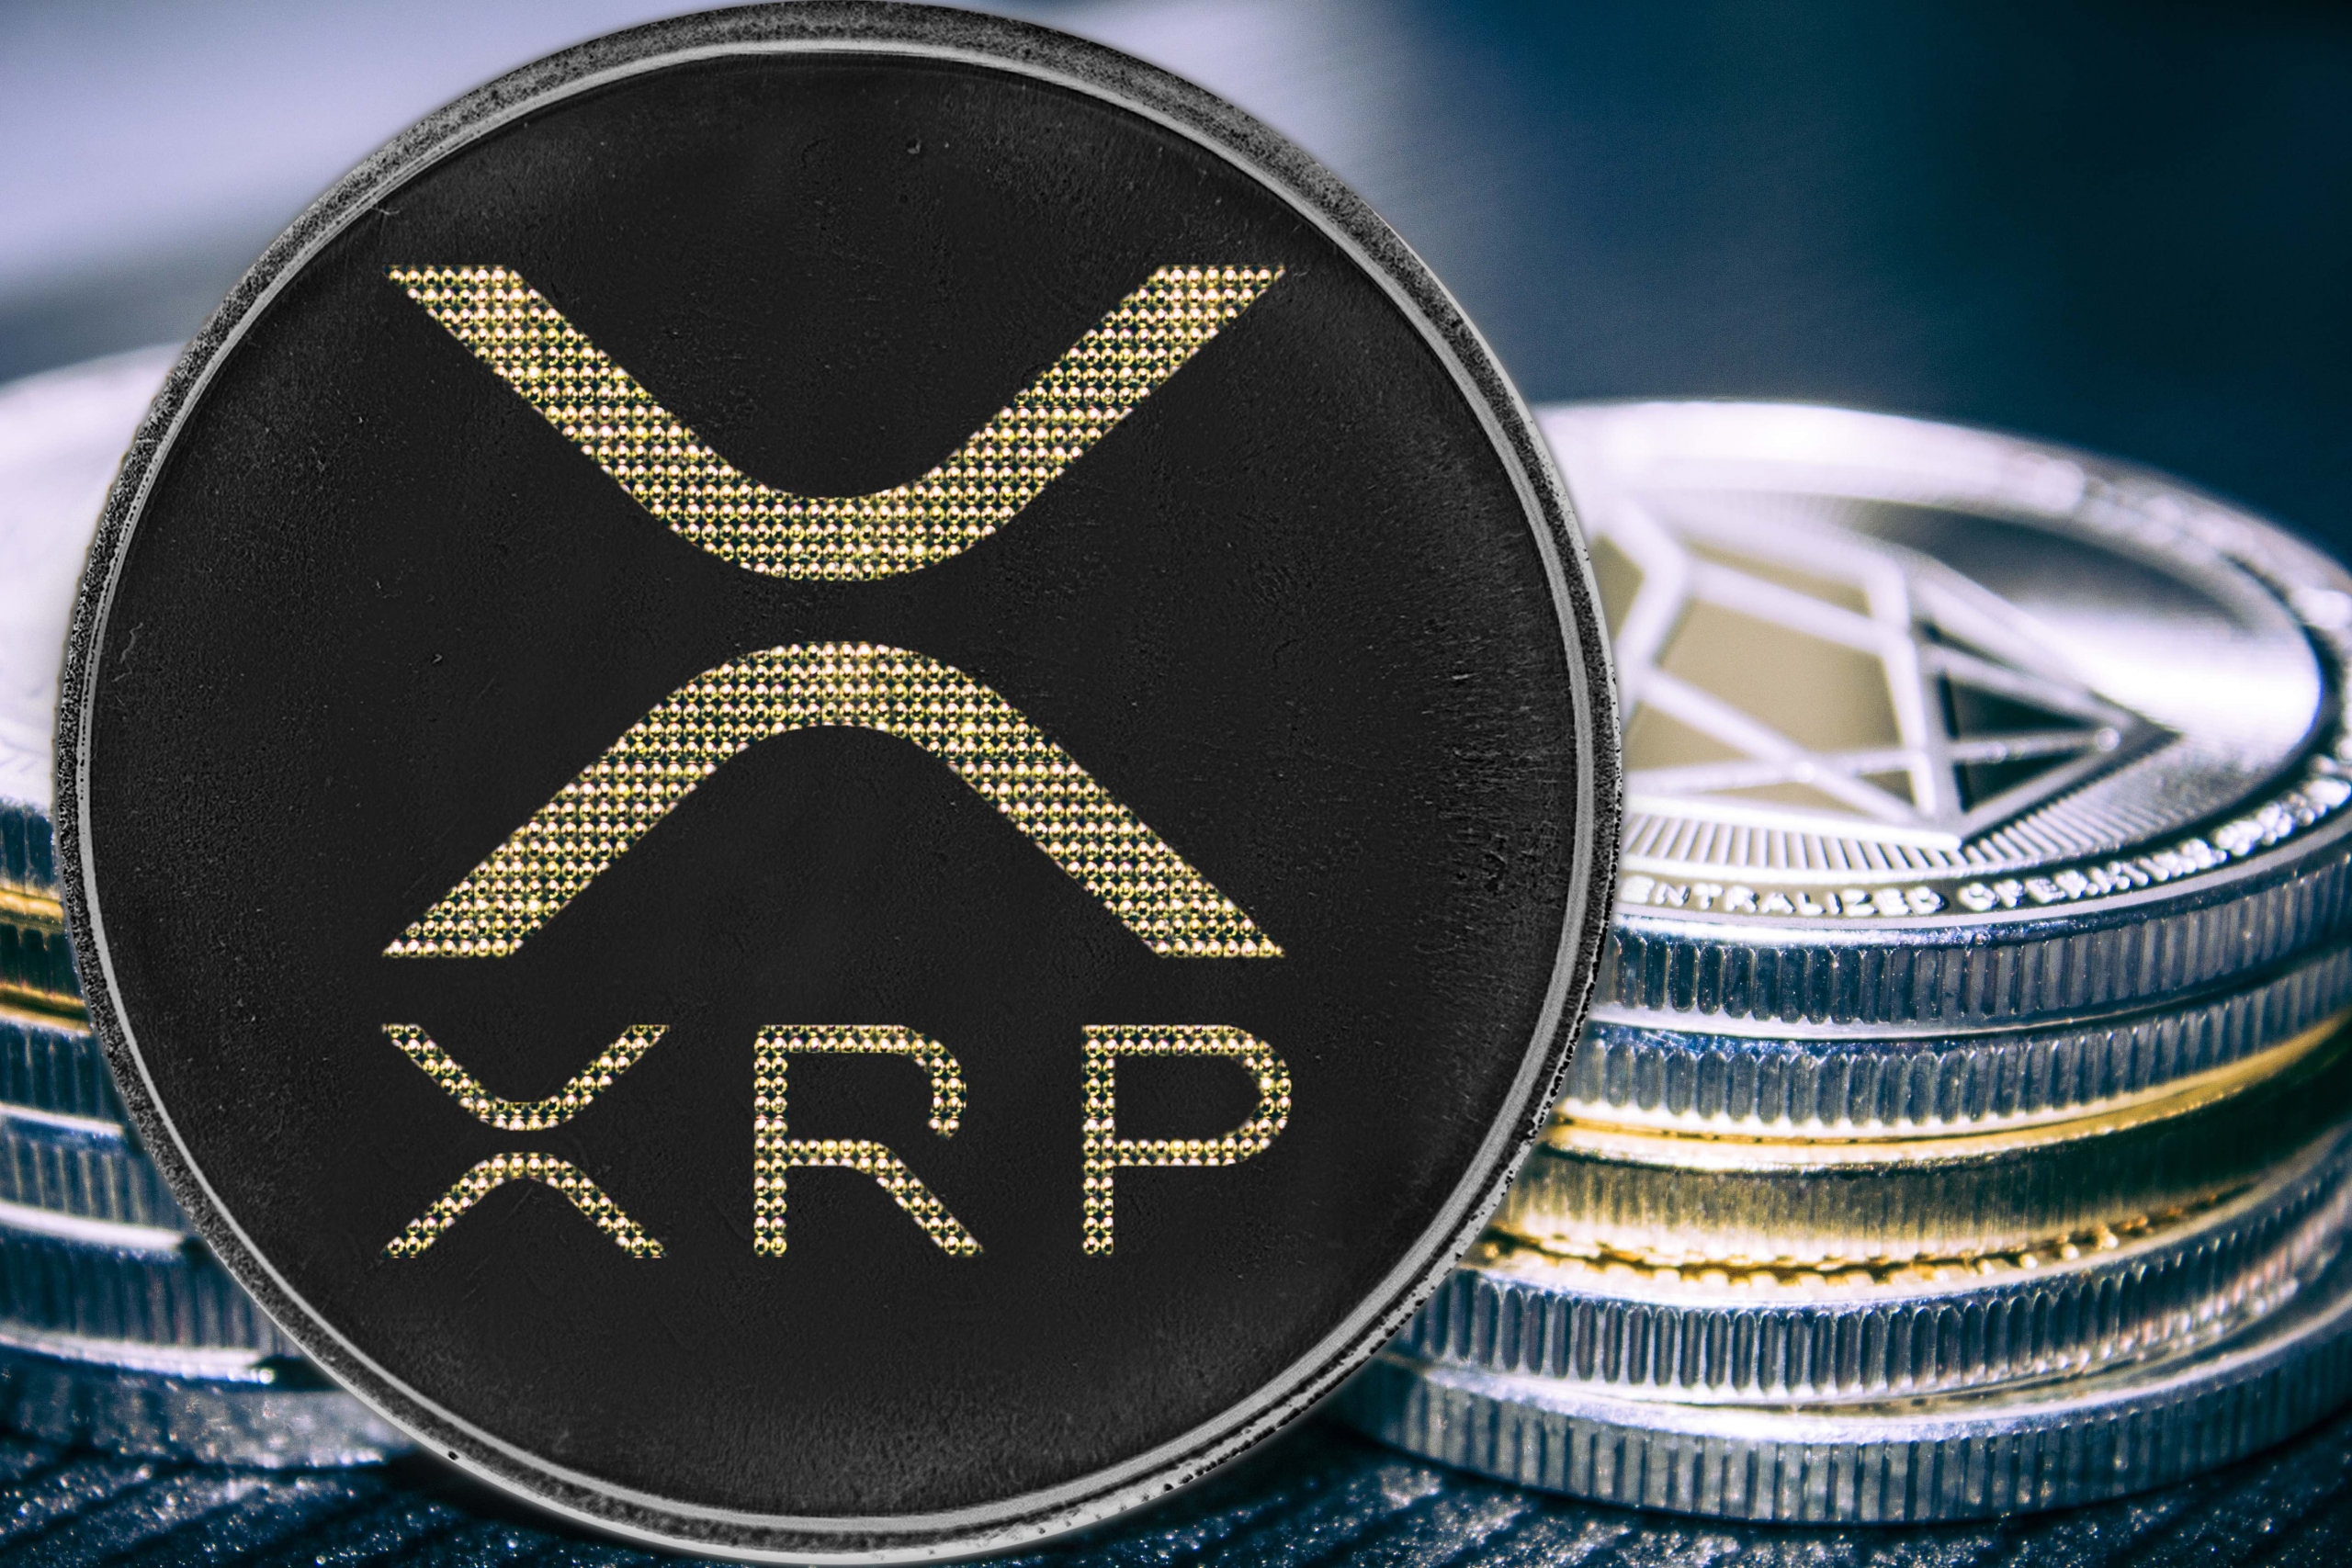 Xpr bitcoin warren buffet on crypto currency